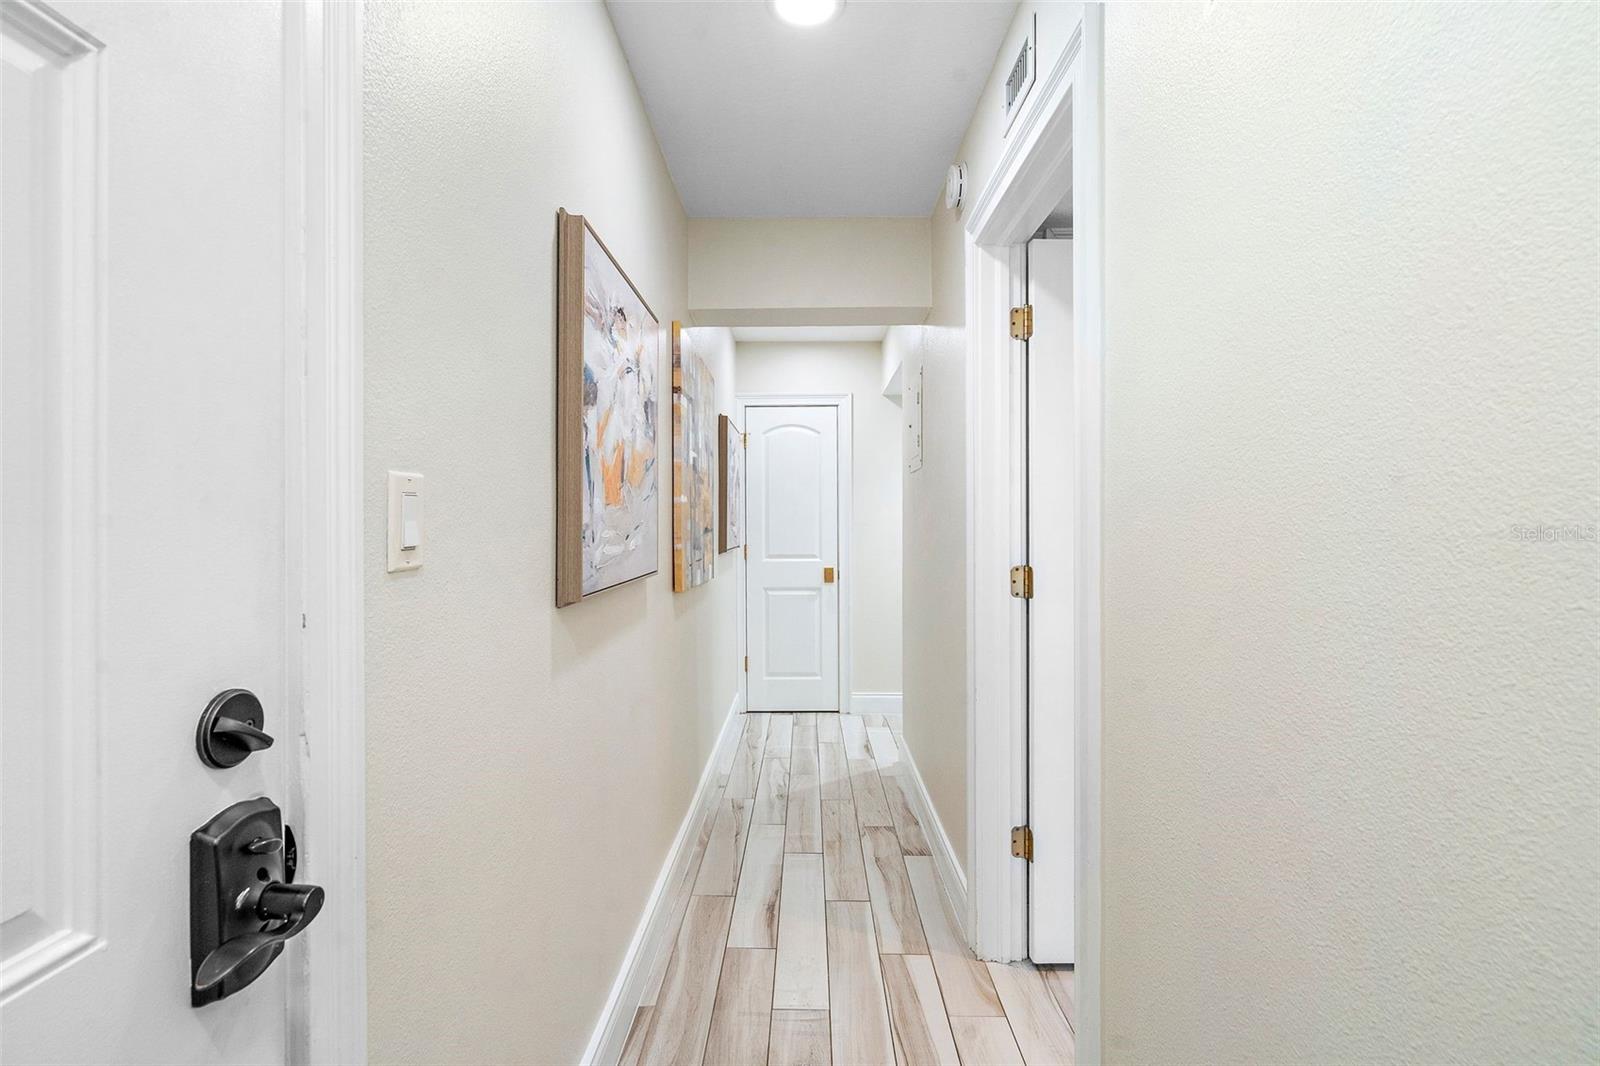 At the end of this hallway, there are three doors: The one you see is where the full-size stackable washer & dryer are. To the left is the Guest bedroom, well away from the primary bedroom. To the right is the front door.